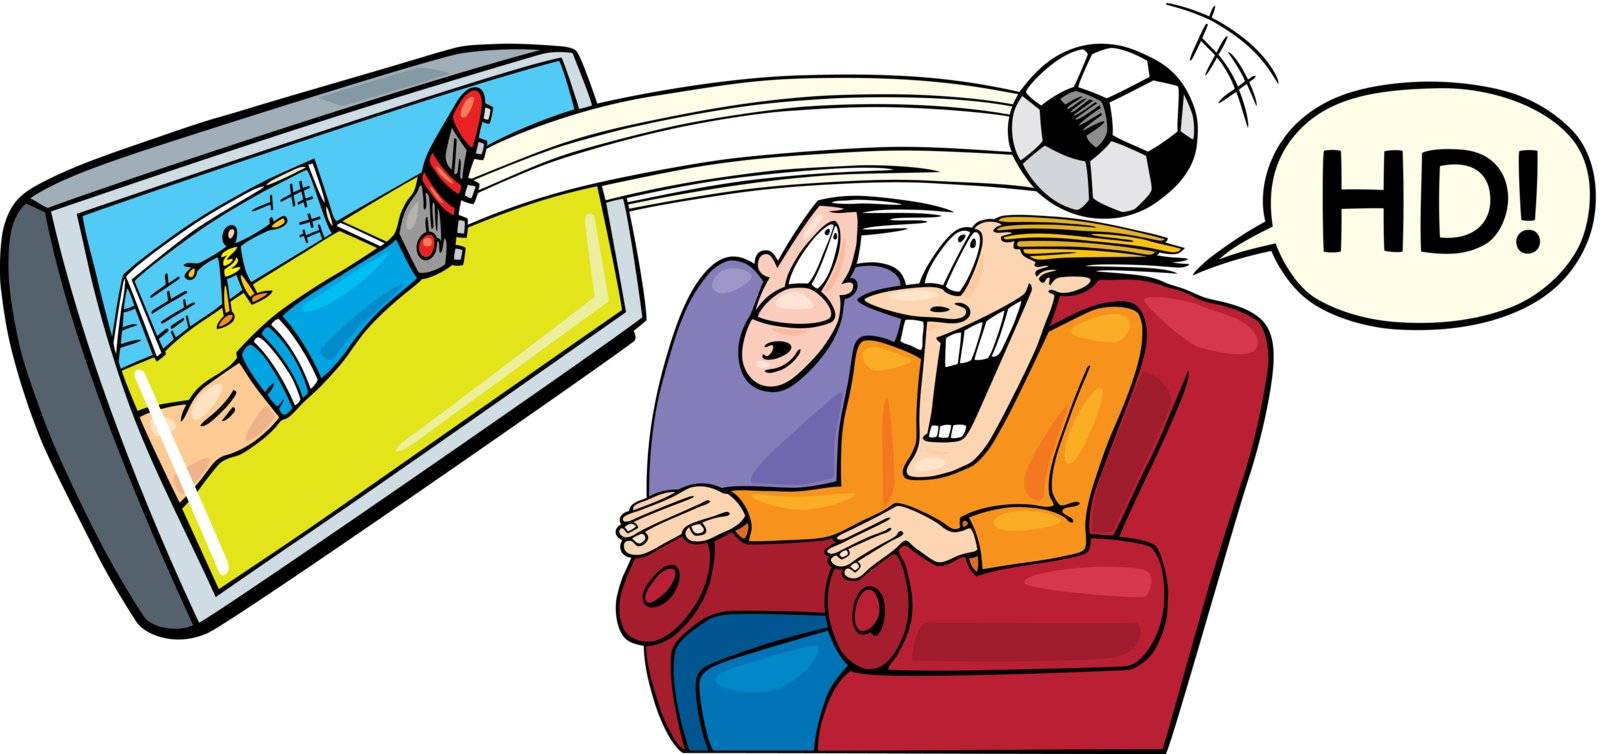 vector illustration of two men watching sport on high definition television